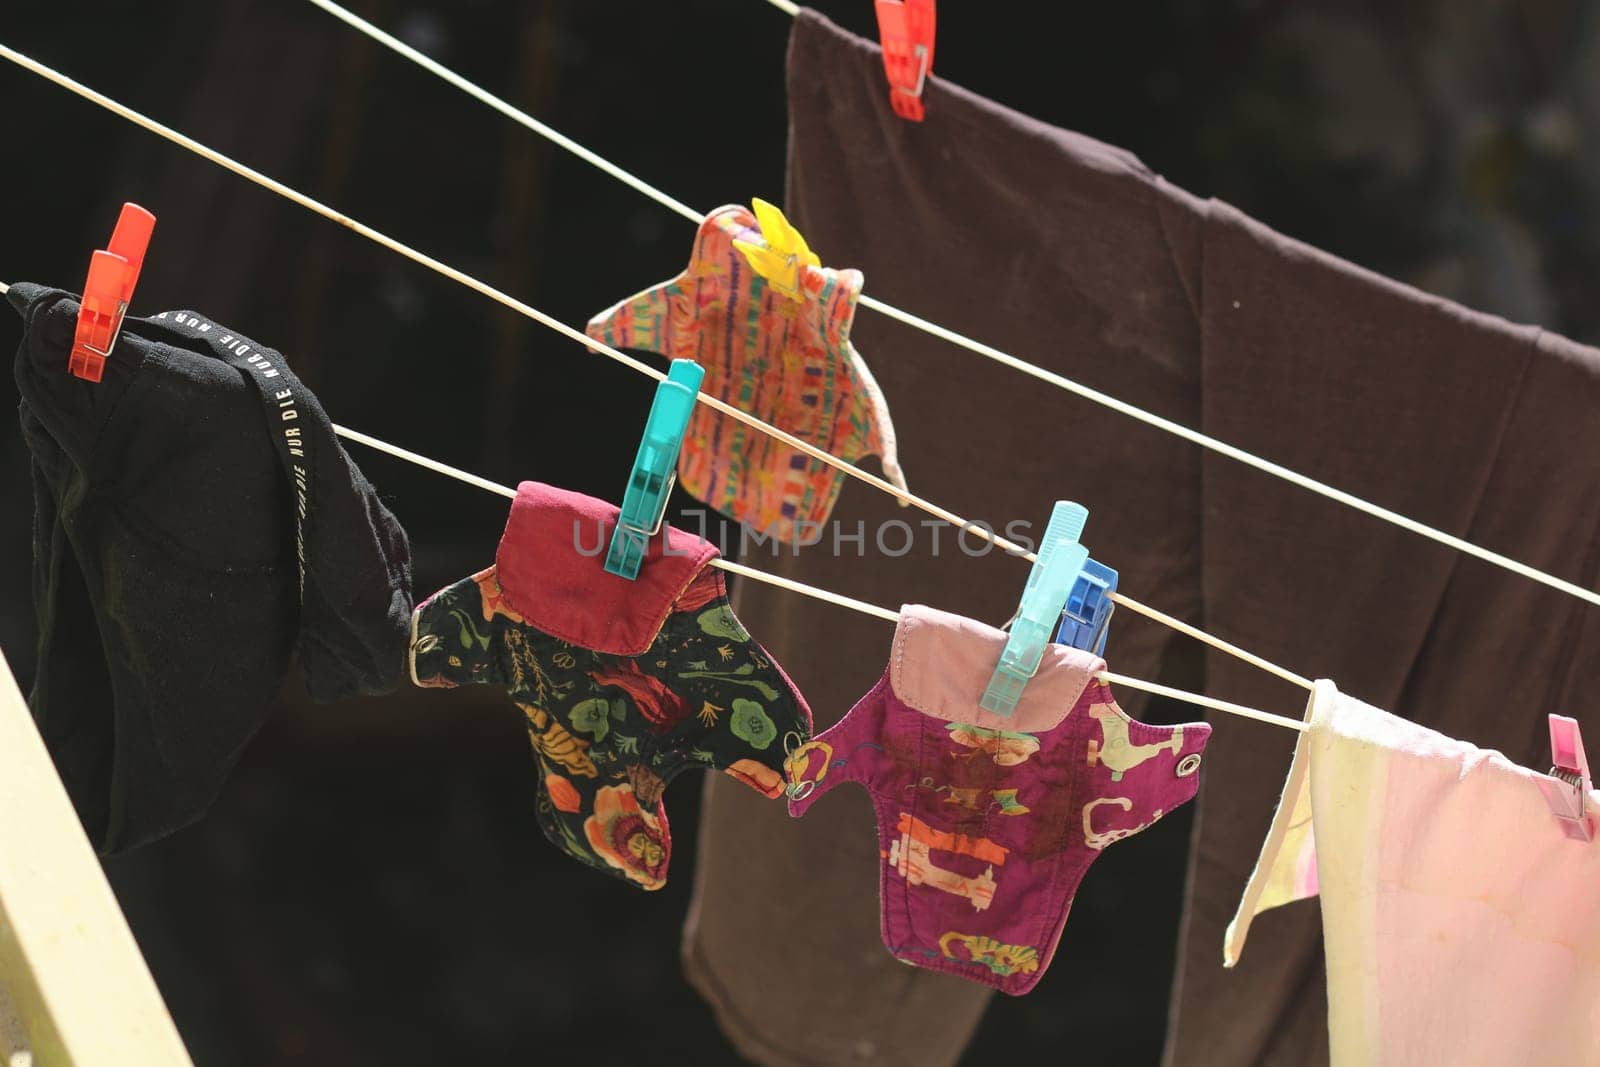 Embrace eco-friendly menstruation with these empowering images of reusable period pads hanging out to dry.